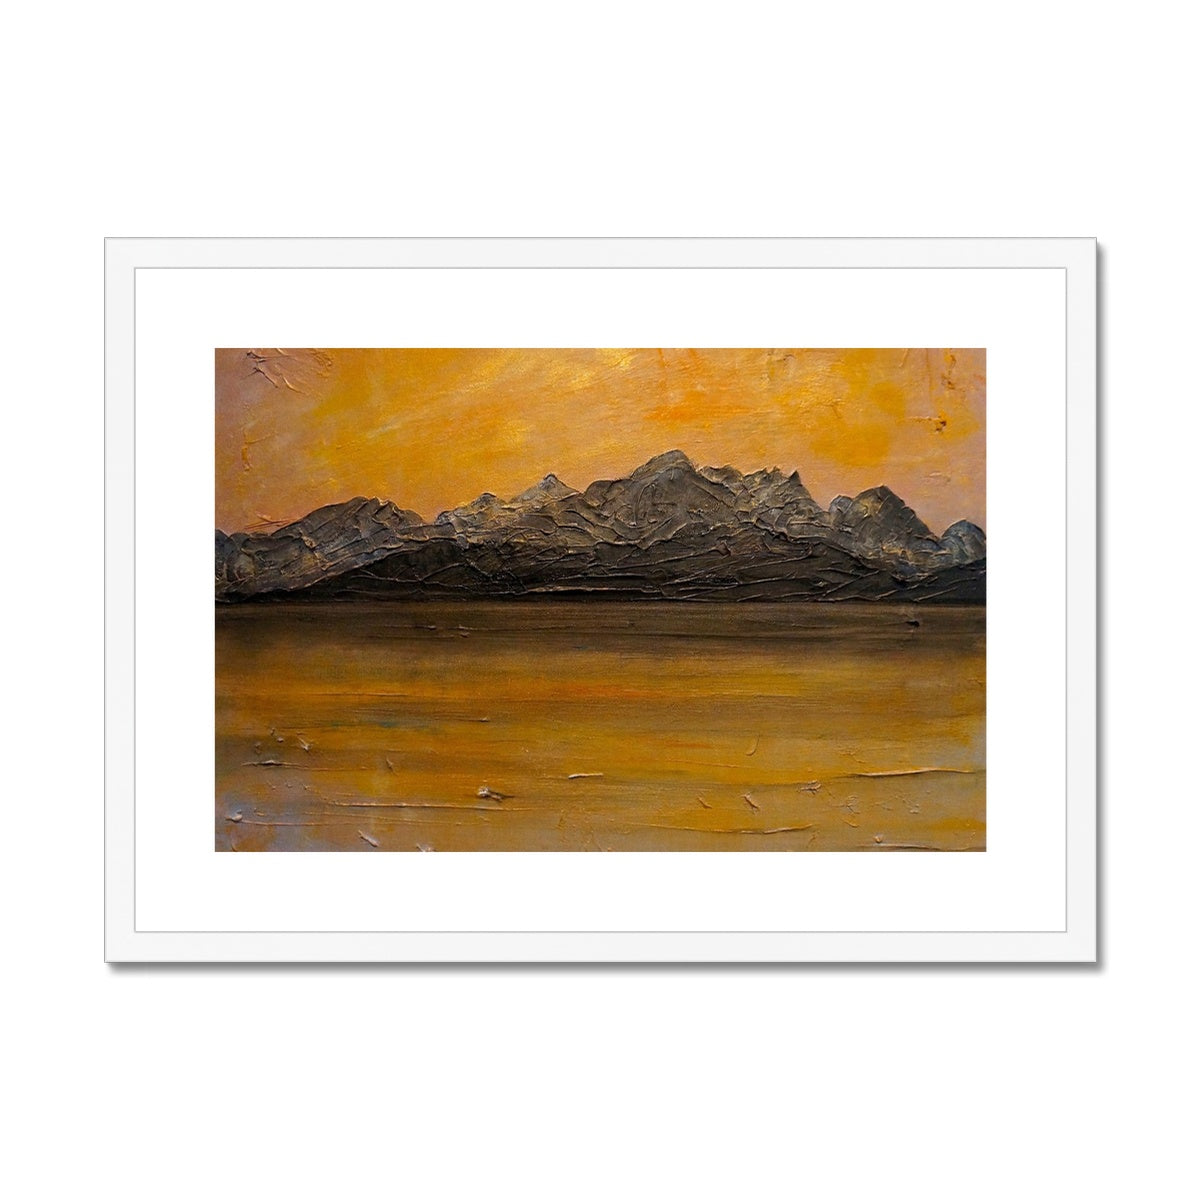 Cuillin Sunset Skye Painting | Framed & Mounted Prints From Scotland-Framed & Mounted Prints-Skye Art Gallery-A2 Landscape-White Frame-Paintings, Prints, Homeware, Art Gifts From Scotland By Scottish Artist Kevin Hunter